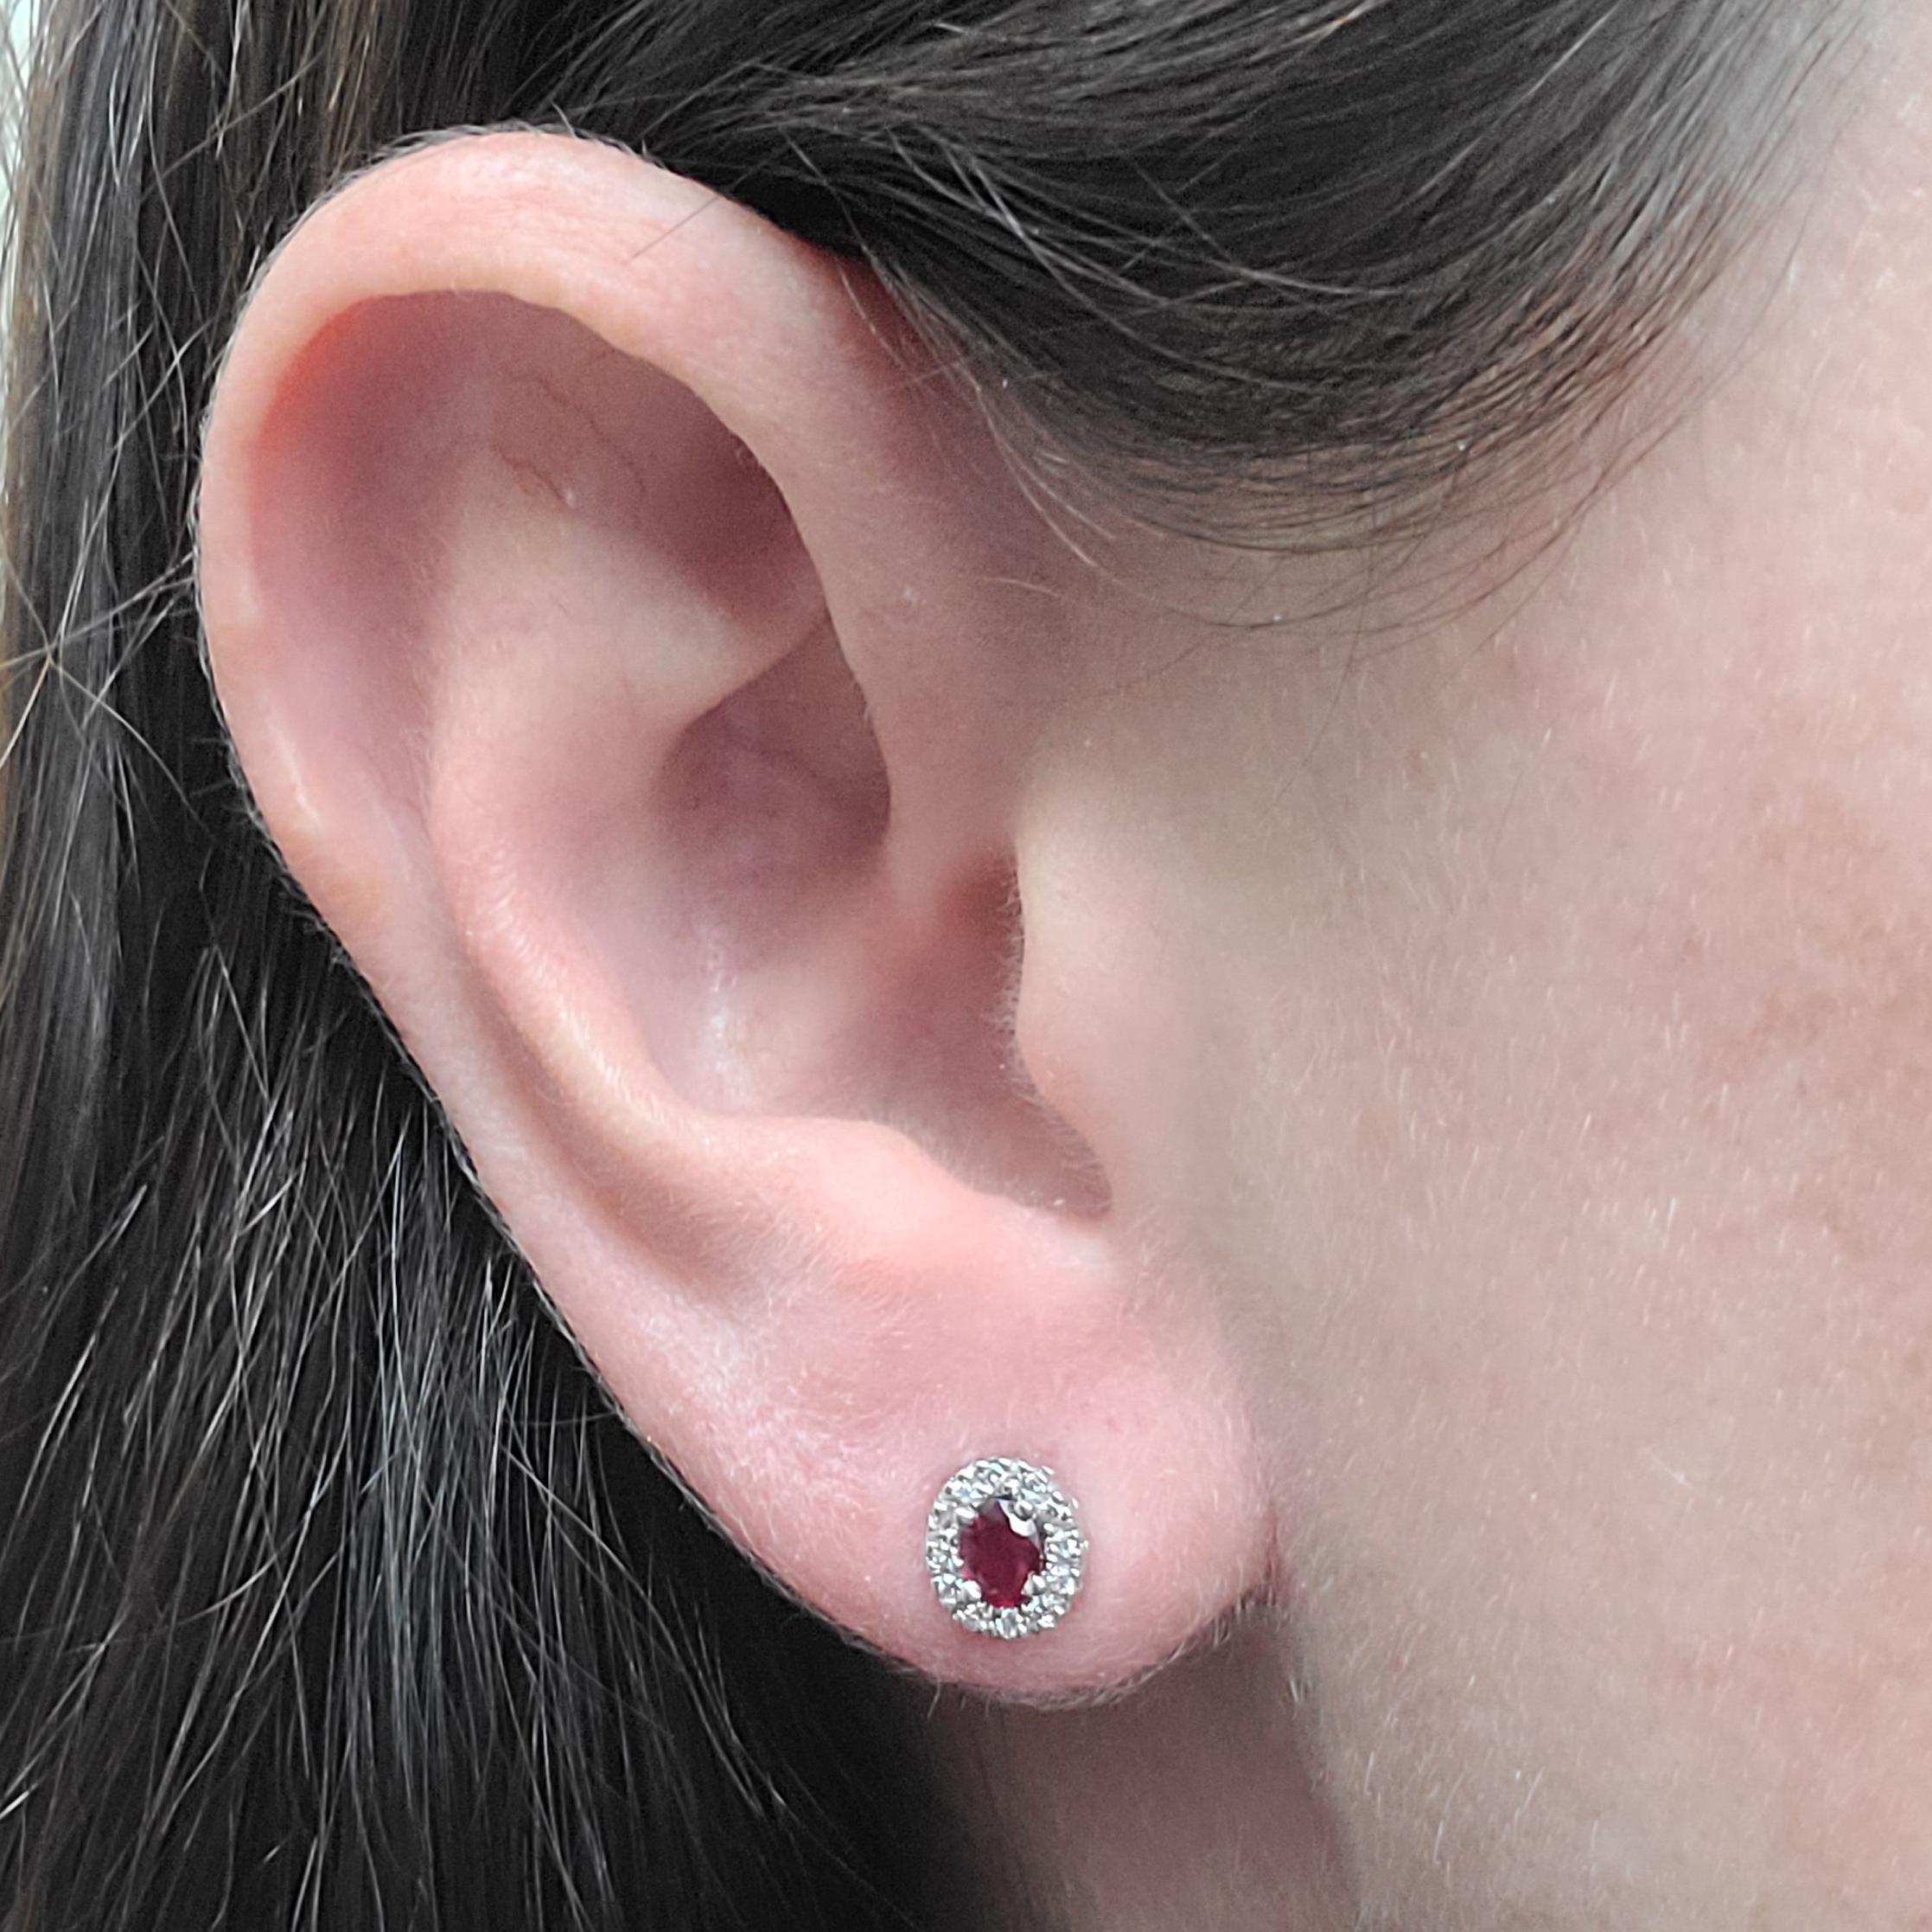 14 Karat White Gold Stud Earrings Featuring 2 Oval Cut Rubies Totaling 0.34 Carats Surrounded By 24 Round Brilliant Cut Diamonds Of VS Clarity & G/H Color Totaling 0.12 Carats.